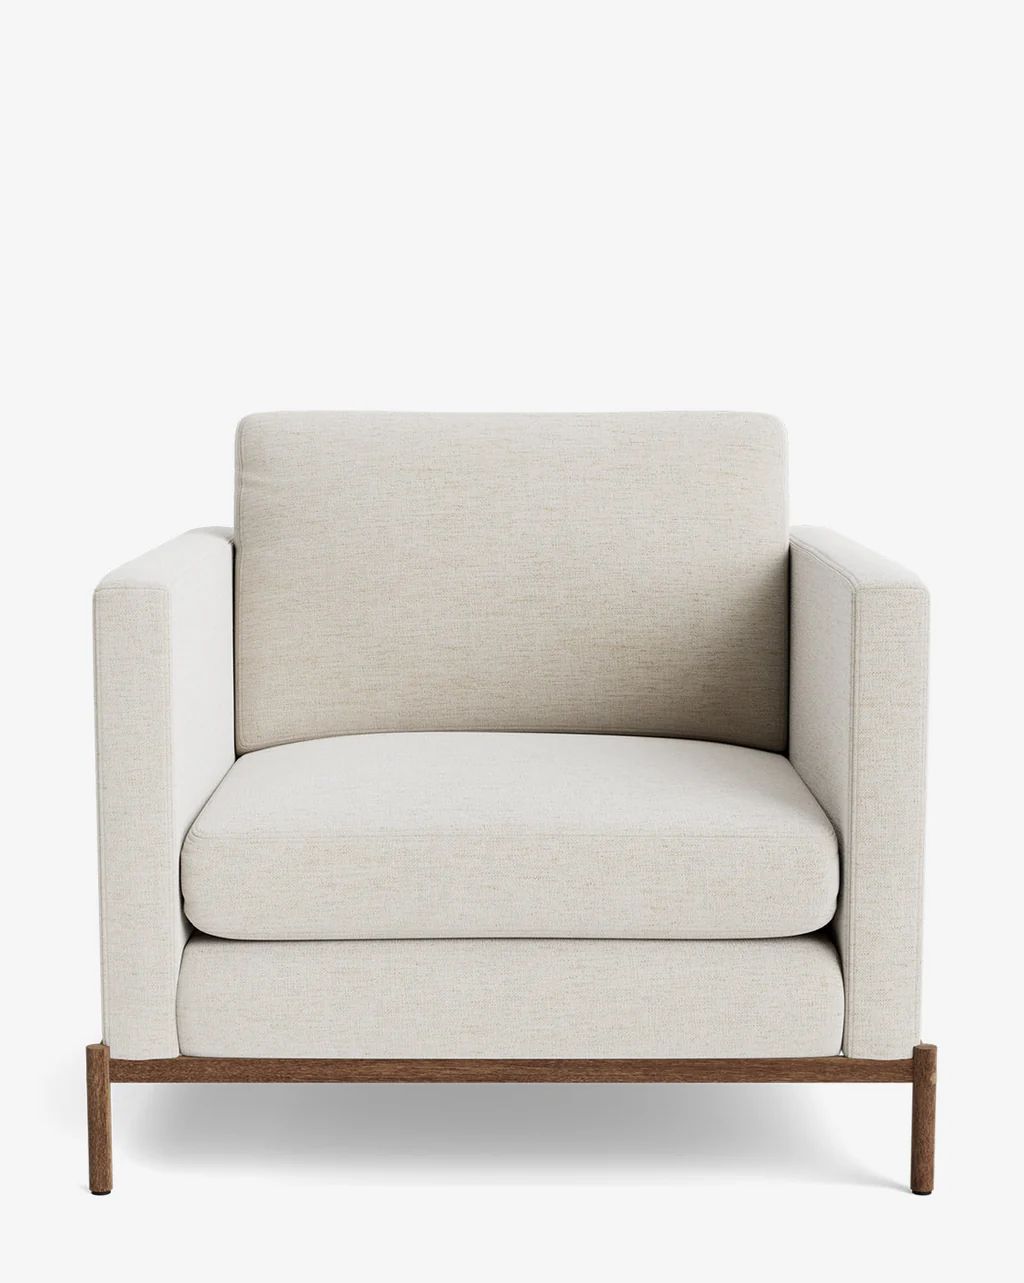 Morrison Wood Base Chair (Ready to Ship) | McGee & Co.